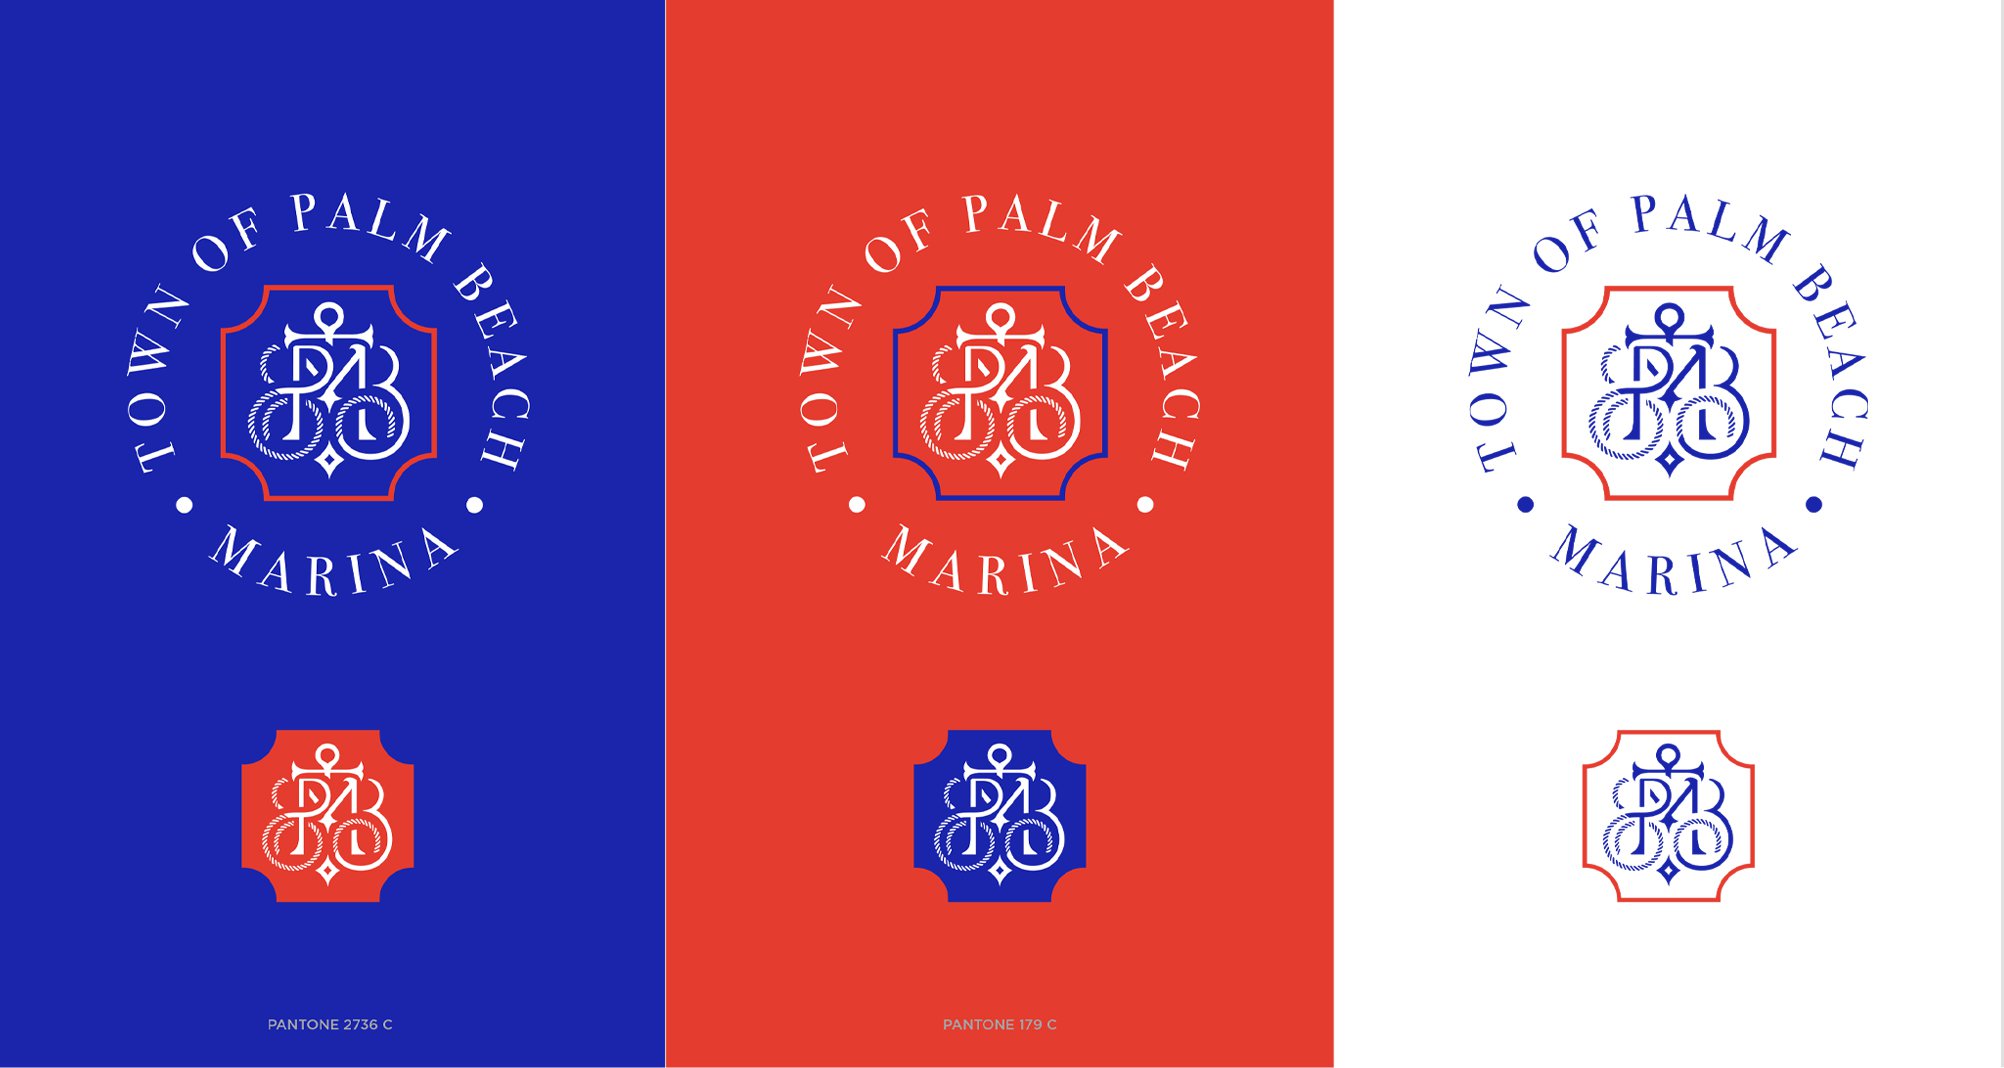 Jacober Creative Brand Identity for The Town of Palm Beach Marina. Official logos and colors.